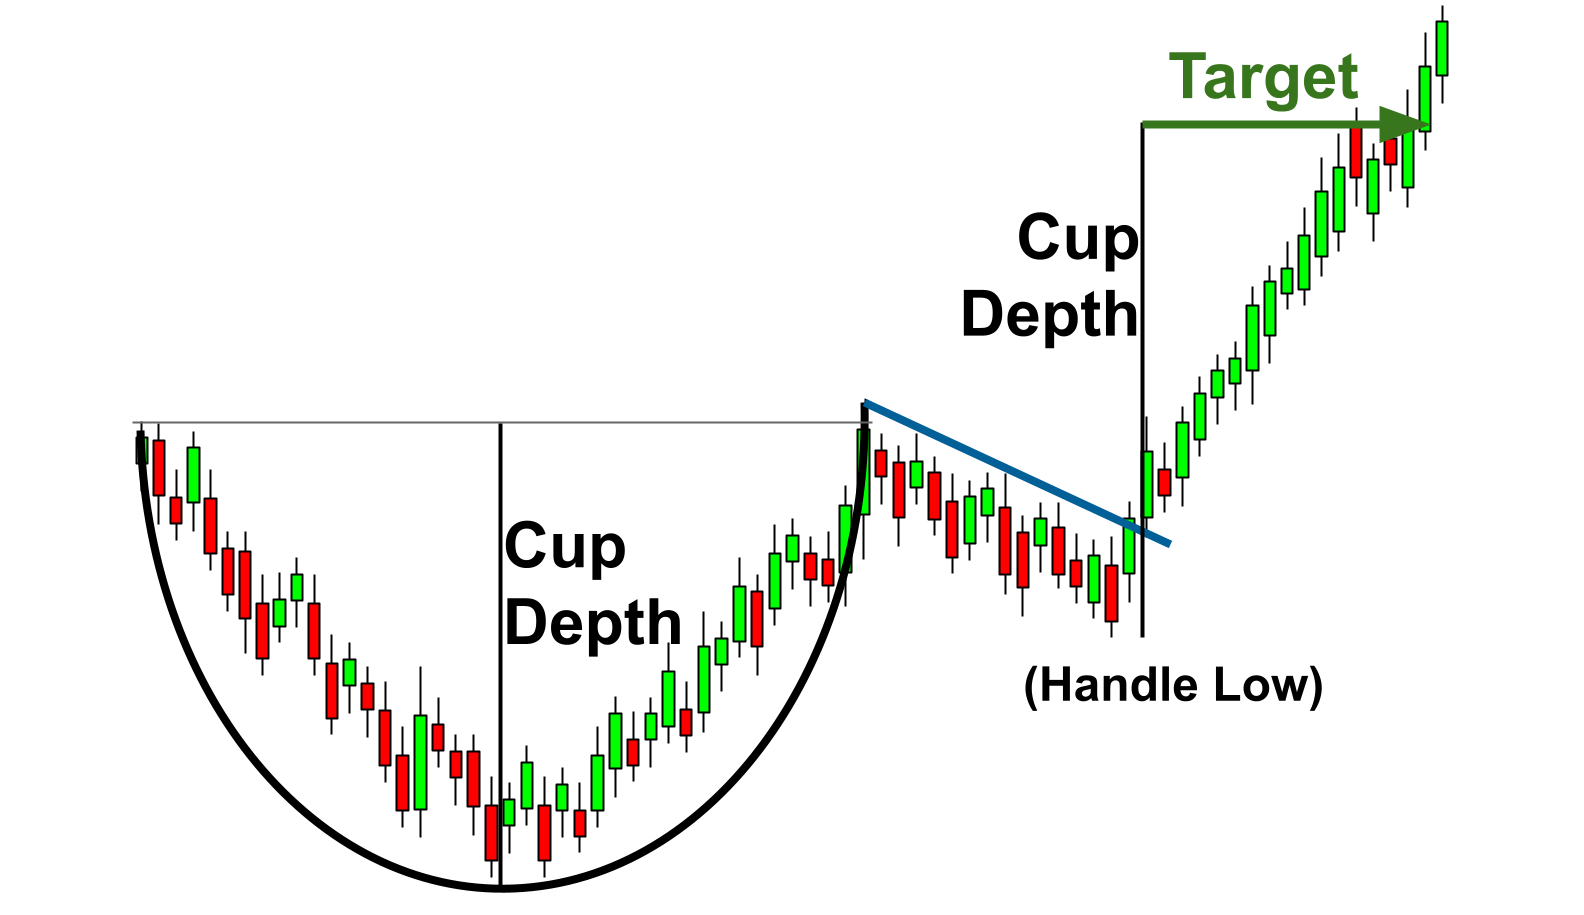 Measuring the distance of the cup and handle for an optimal risk-to-reward ratio